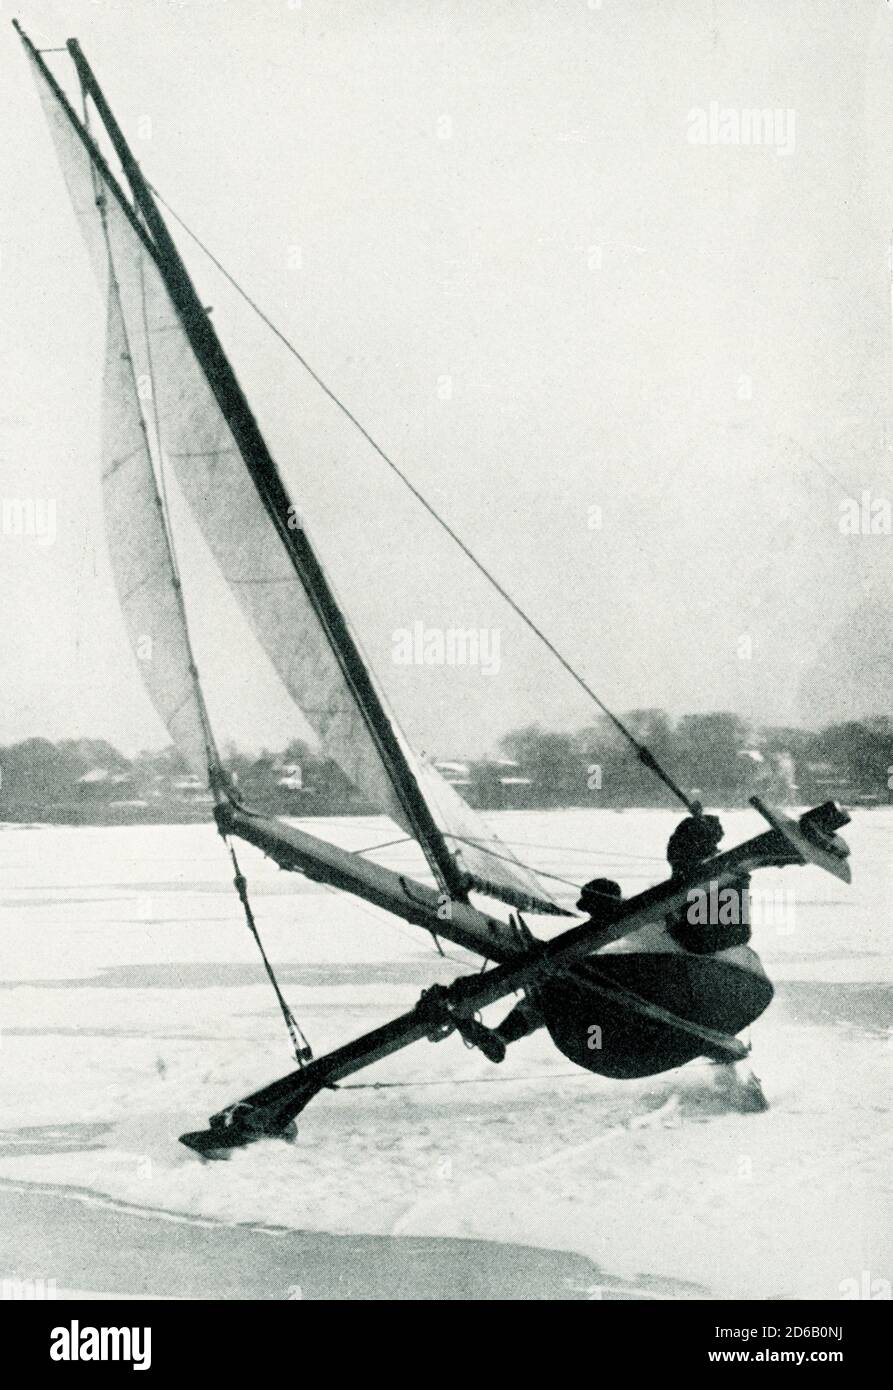 Ice Boating at Long Branch New Jersey Taking a turn while going at a fast clip during one of the exciting races held by the Long Branch Ice Boat and Yacht Club - around 1920. Stock Photo